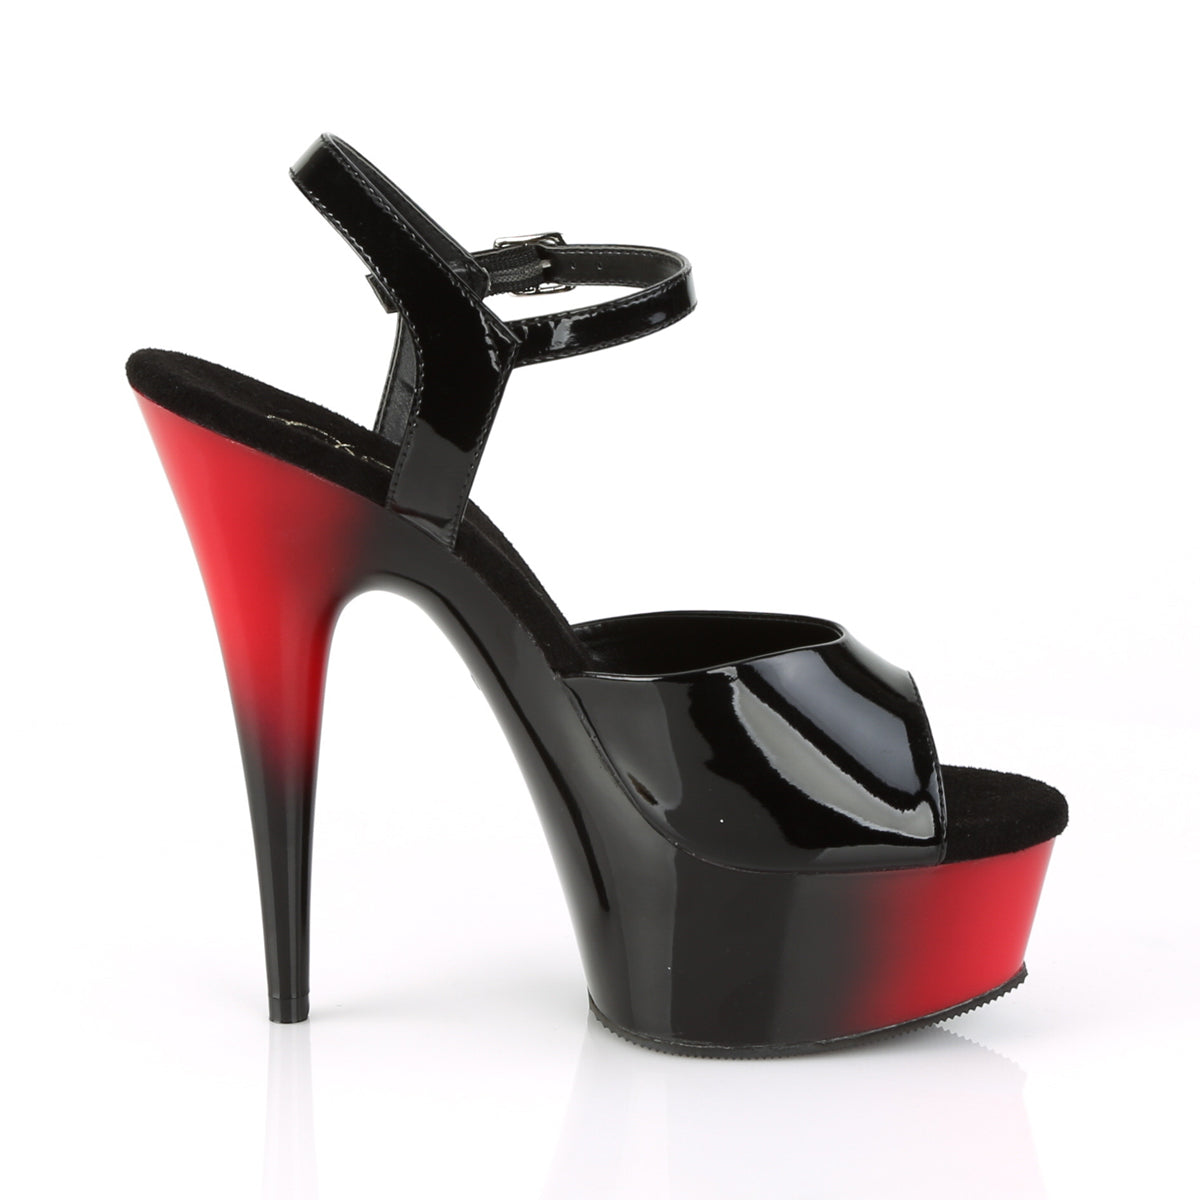 DELIGHT-609BR 6" Heel Black and Red Pole Dancing Platforms-Pleaser- Sexy Shoes Fetish Heels